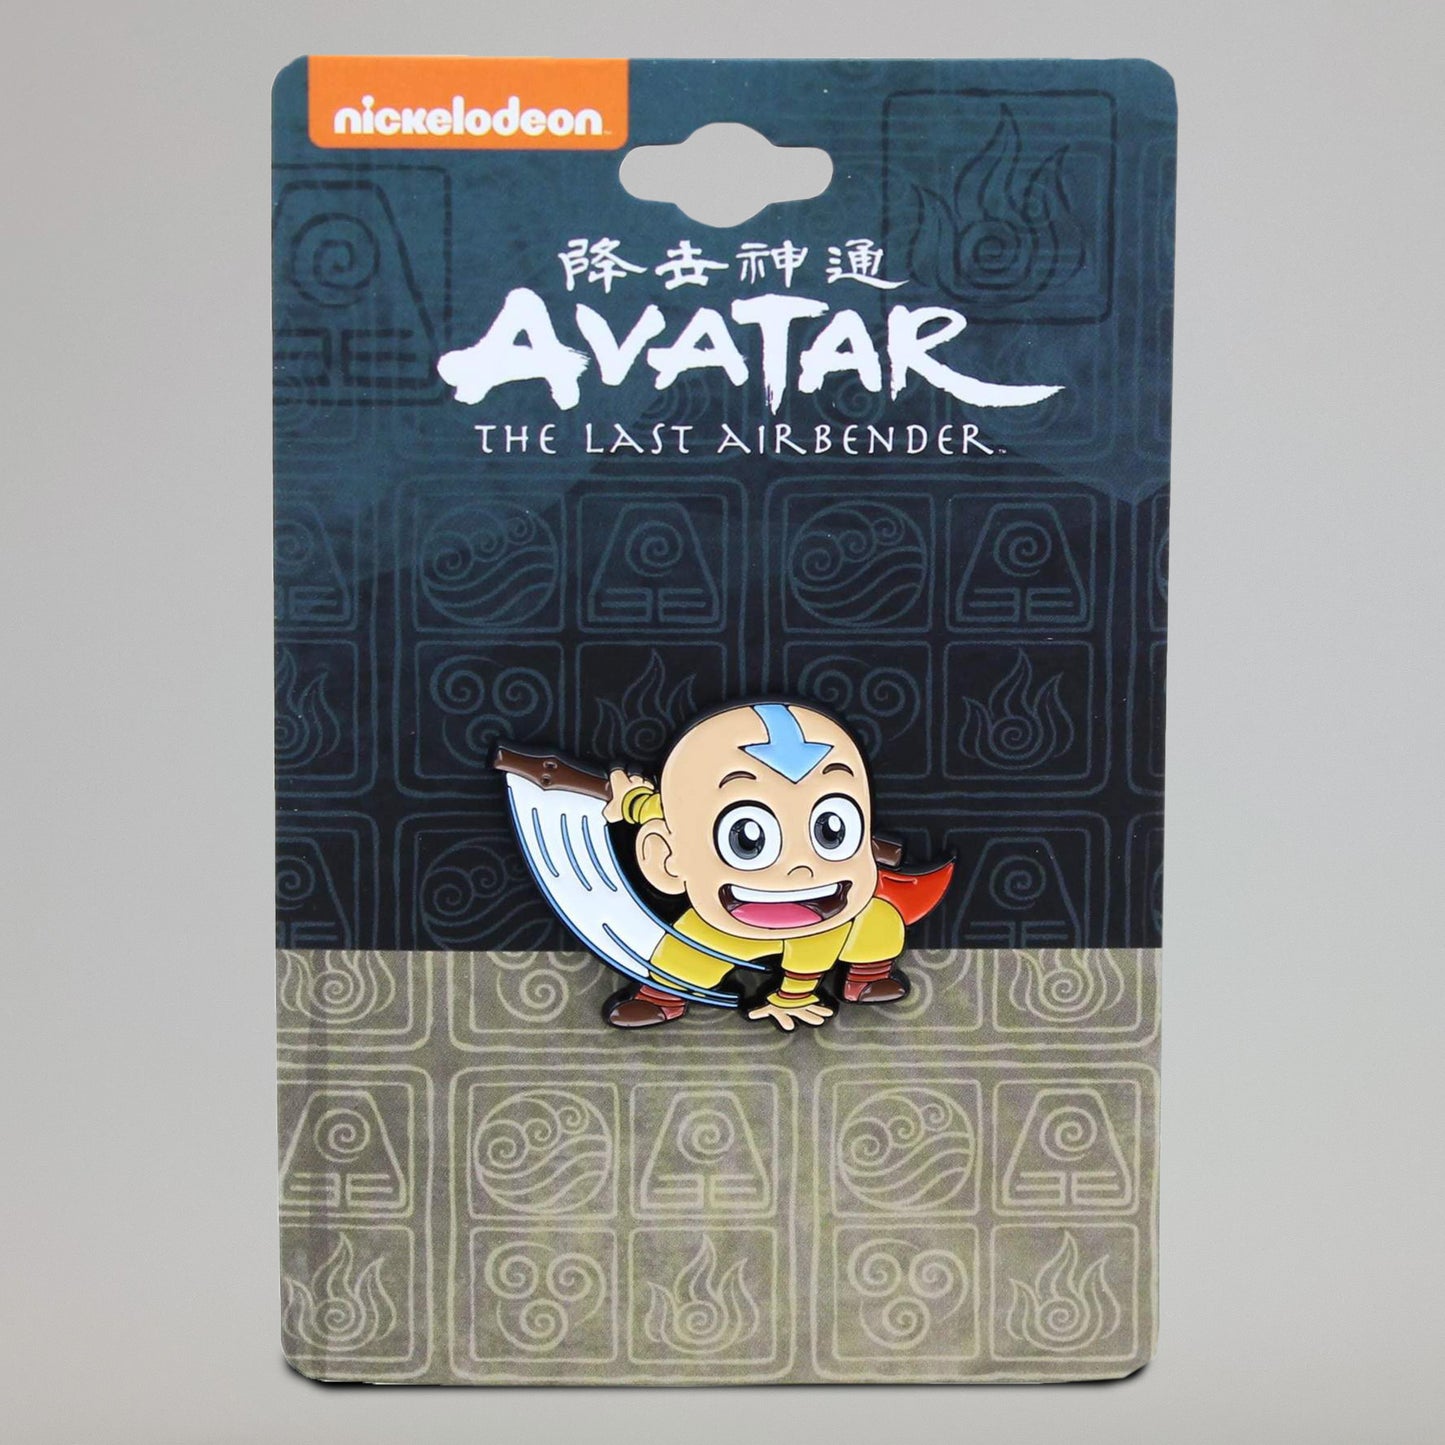 Aang (With Staff) Avatar: The Last Airbender Chibi Enamel Pin